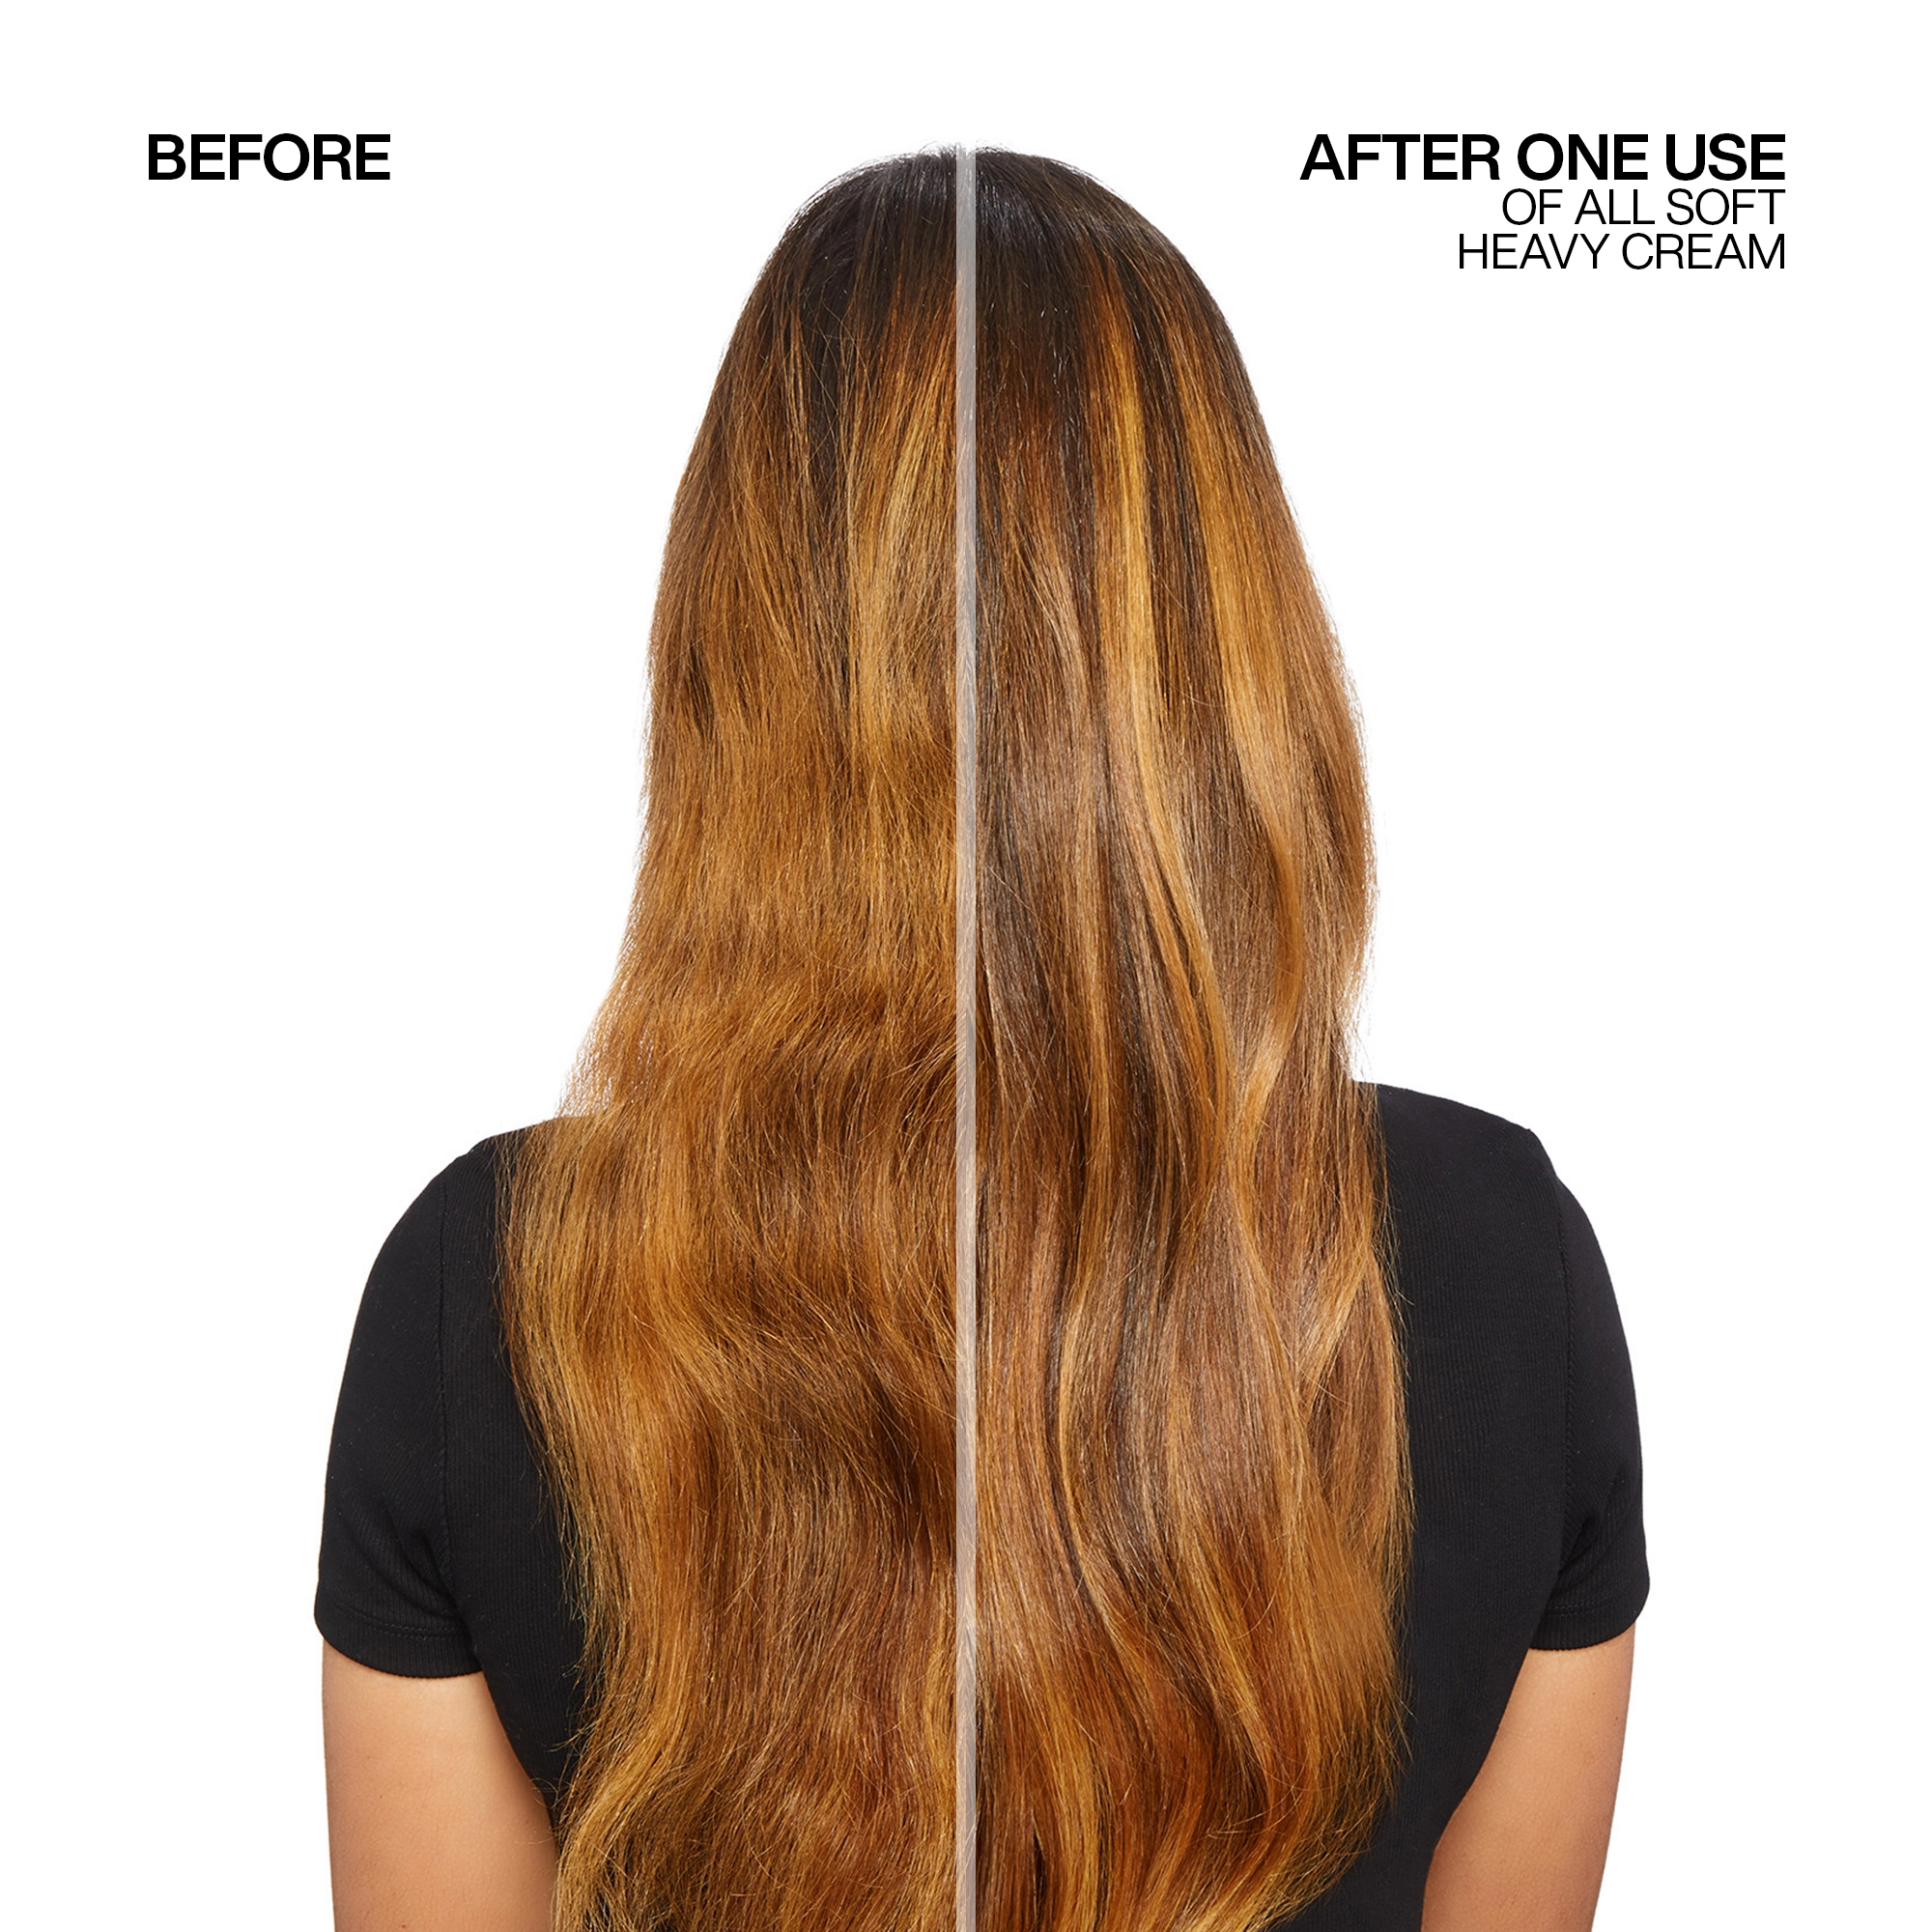 Redken-2020-All-Soft-Heavy-Cream-EComm-Before-After-Opt1-2000×2000